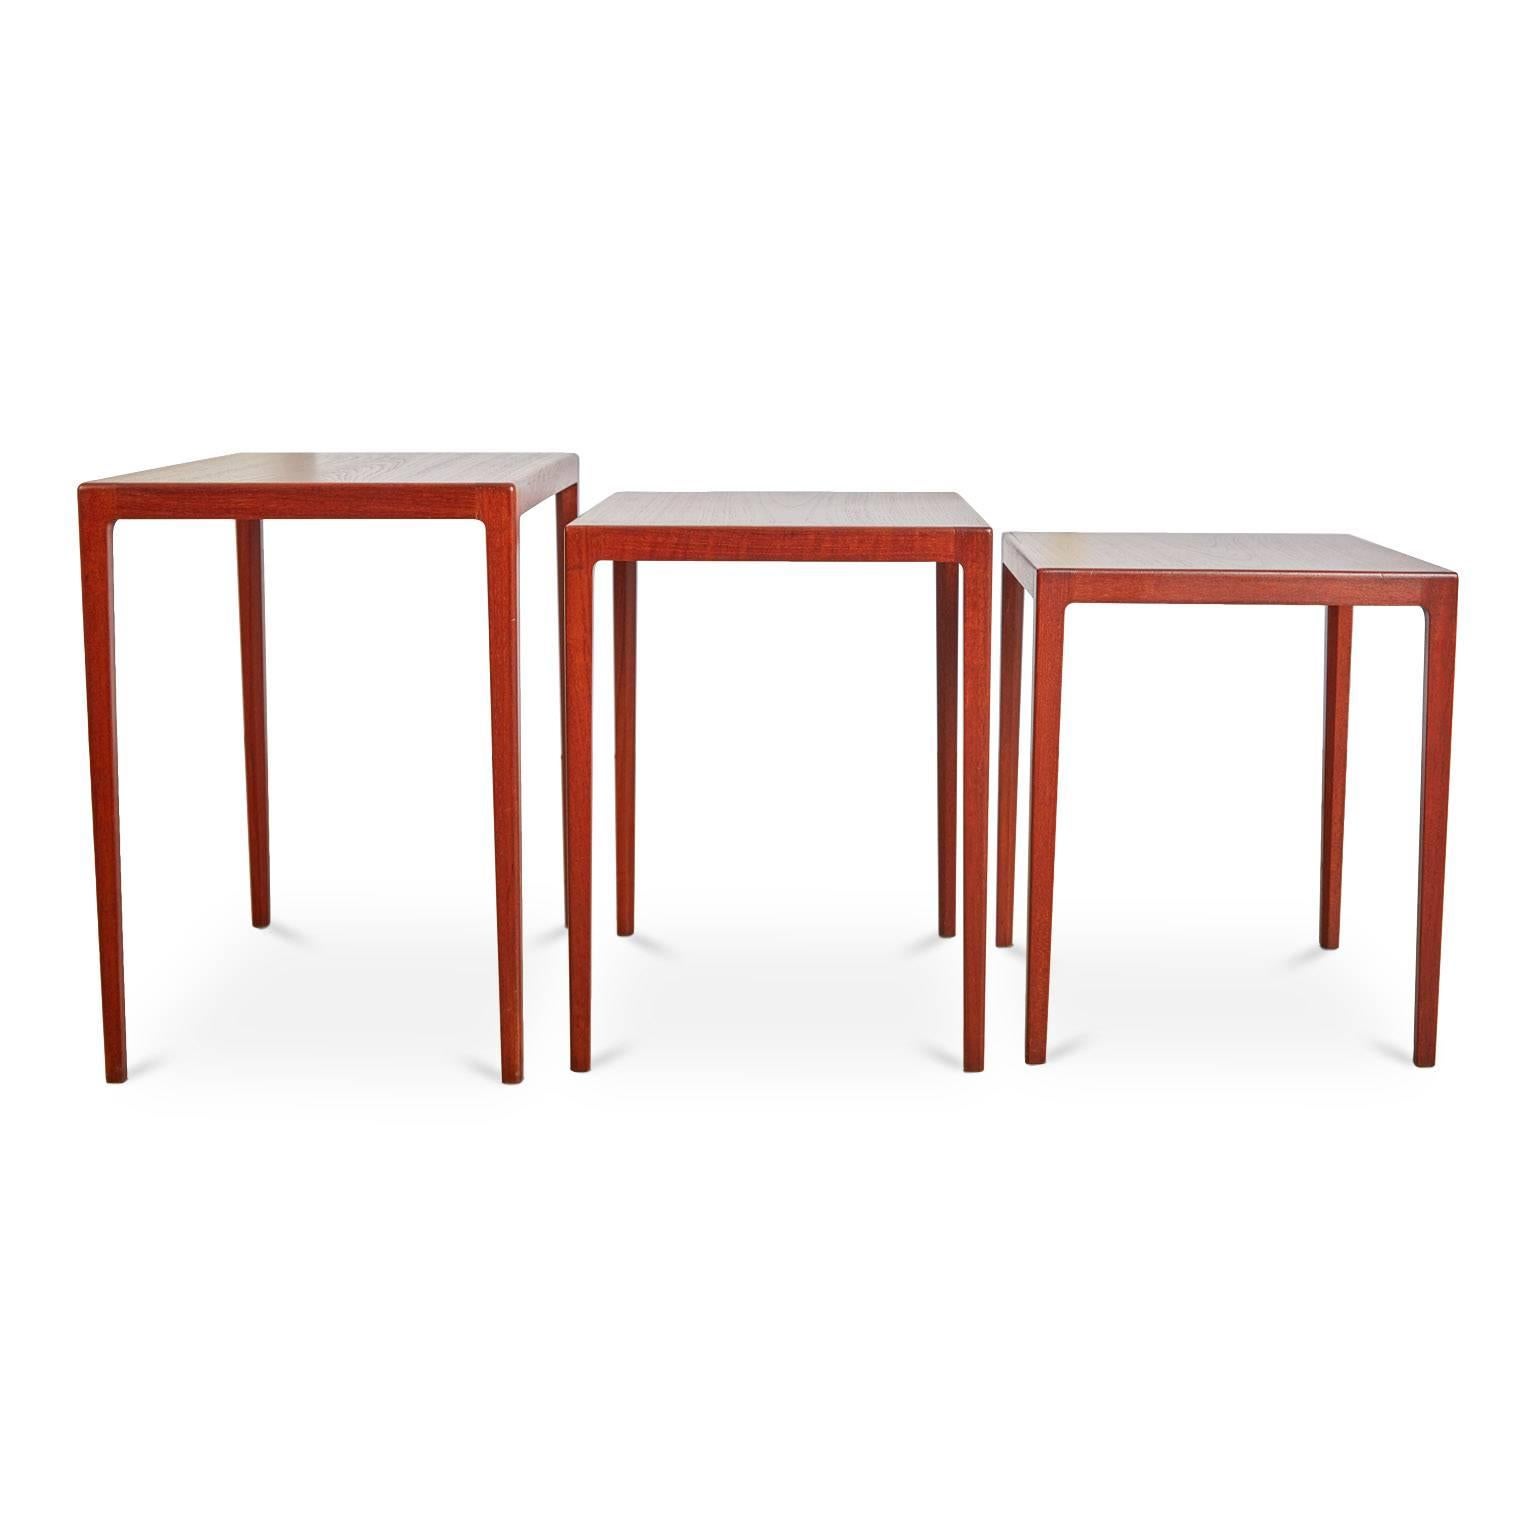 Set of exquisite nesting side tables designed by celebrated Danish Architect Eske Kristensen and crafted by master cabinetmaker of the same nationality Ludwig Pontoppidan. This beautifully executed set of three (3) side tables have been expertly